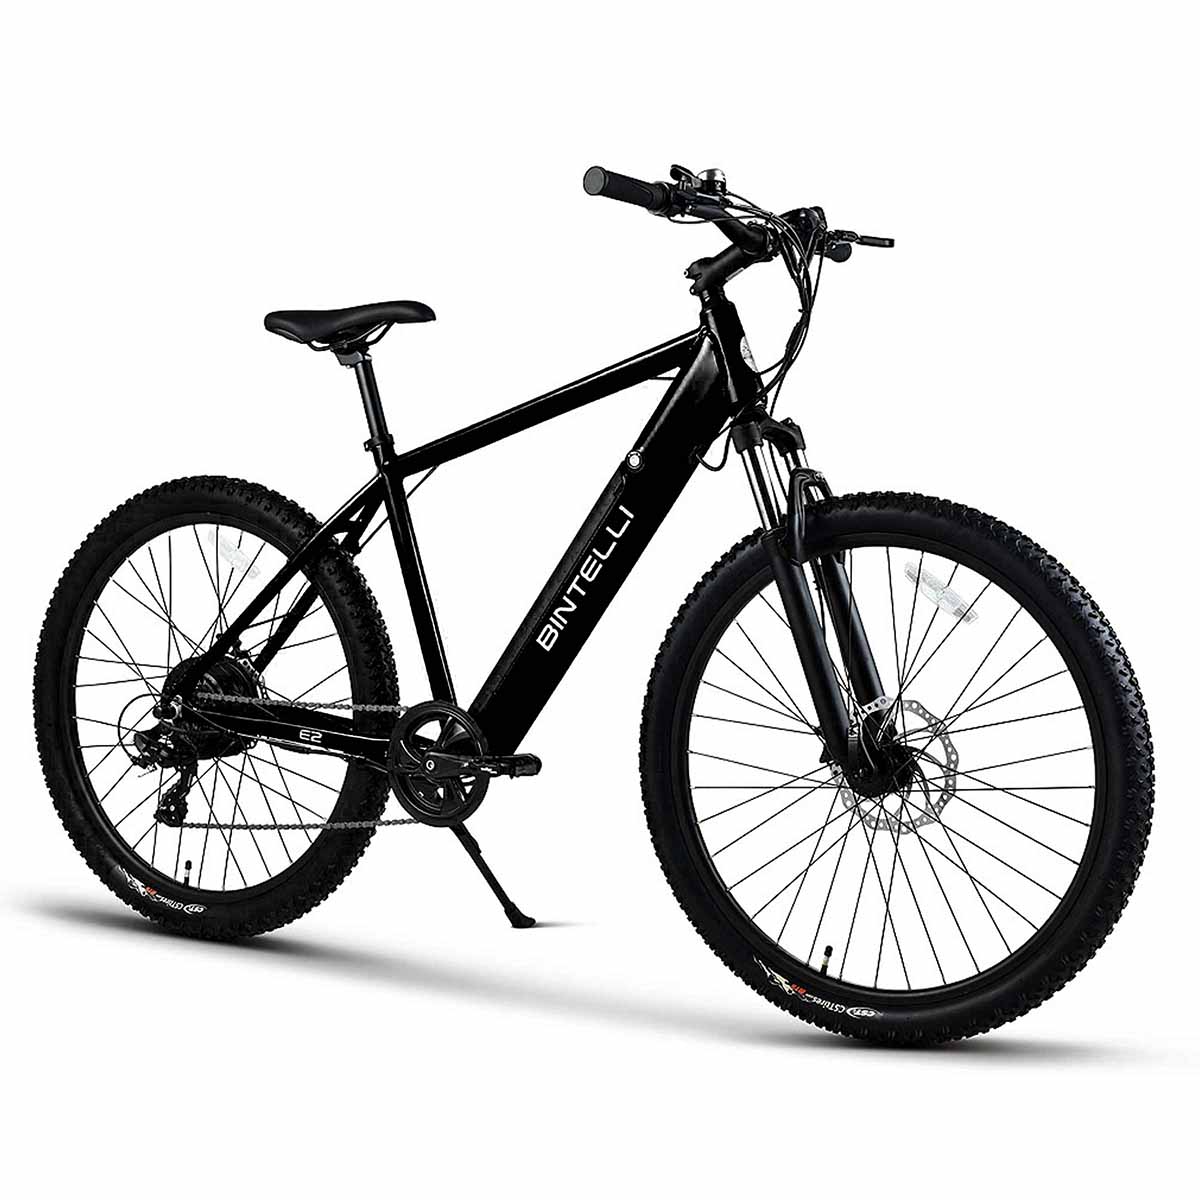 Super Sleek black bintelli E2 electric bicycle with 350w motor and 20mph speed